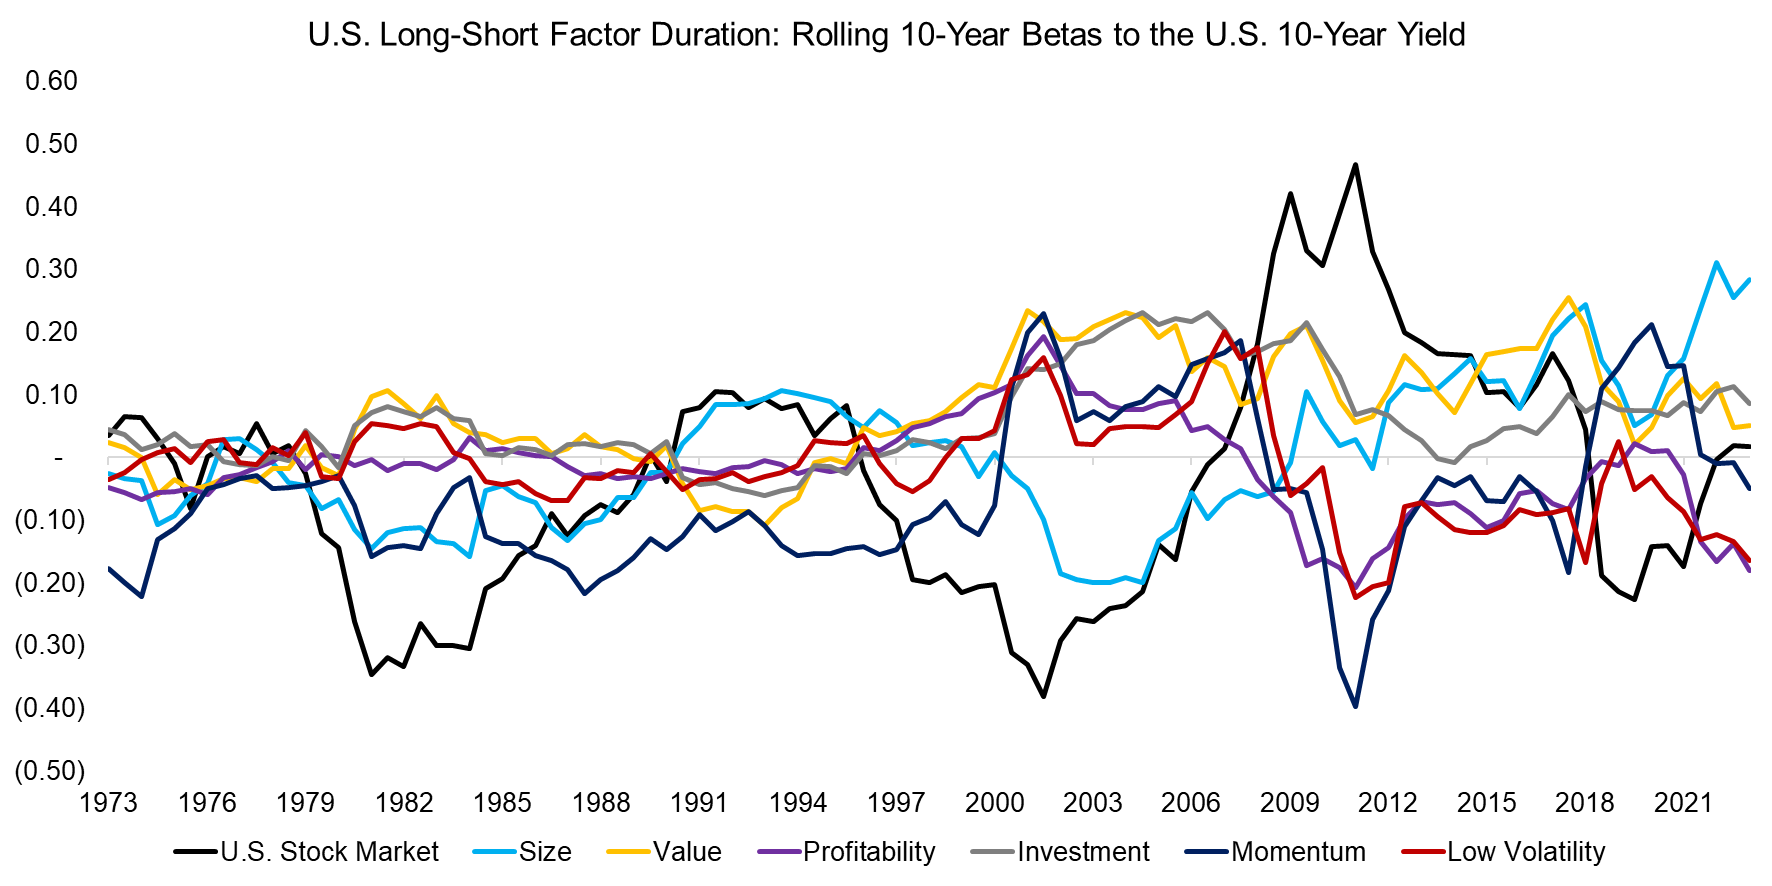 U.S. Long-Short Factor Duration Rolling 10-Year Betas to the U.S. 10-Year Yield